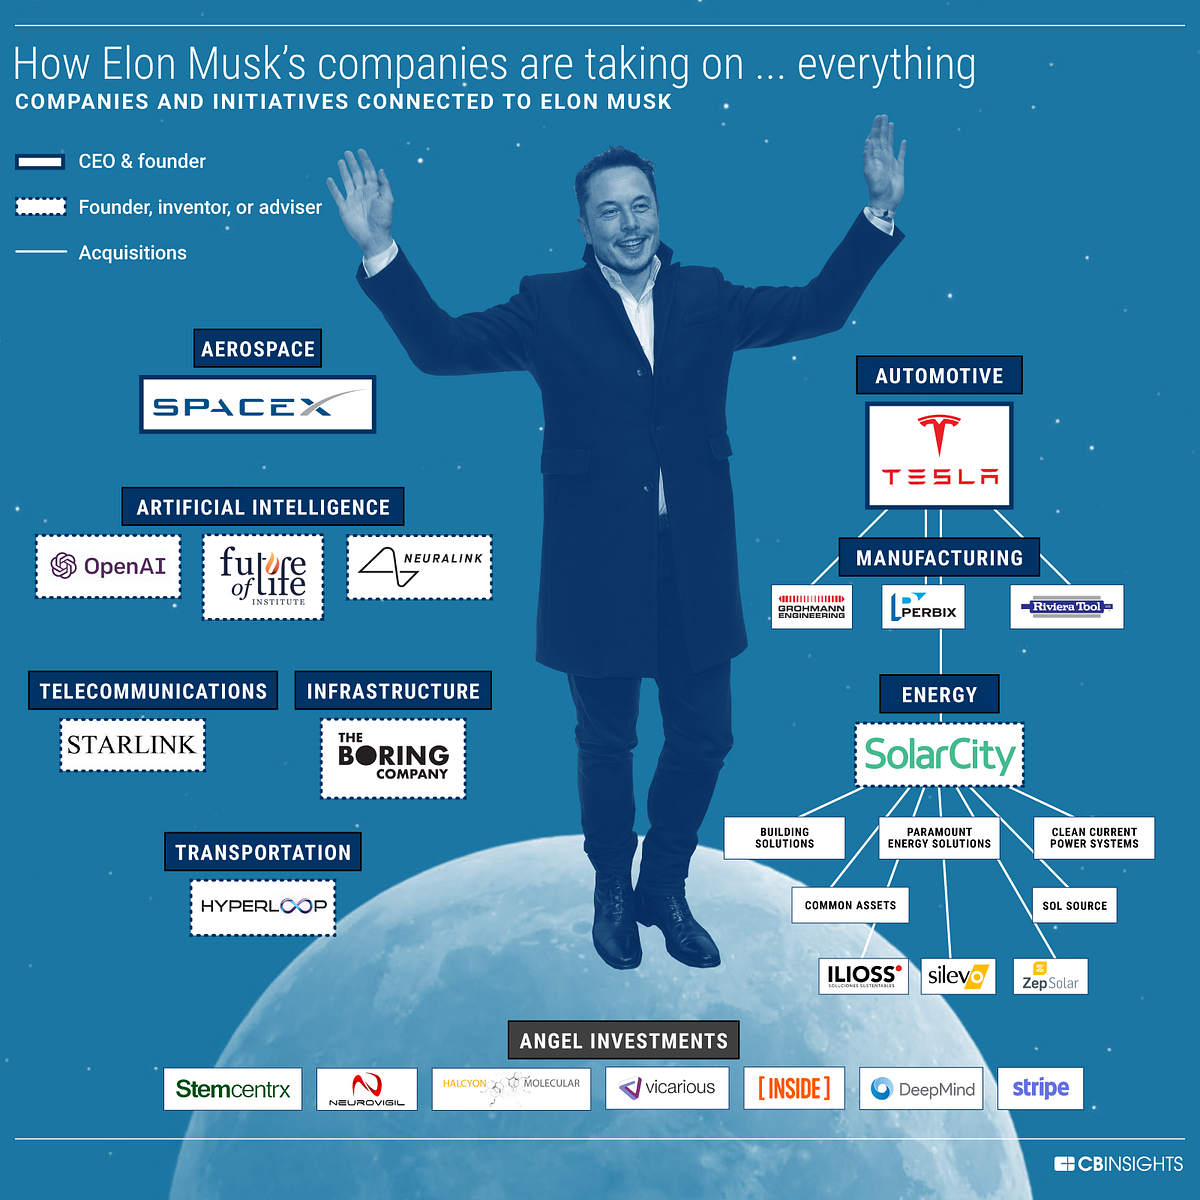 Meet the Industries Being Disrupted By Elon Musk And His ...